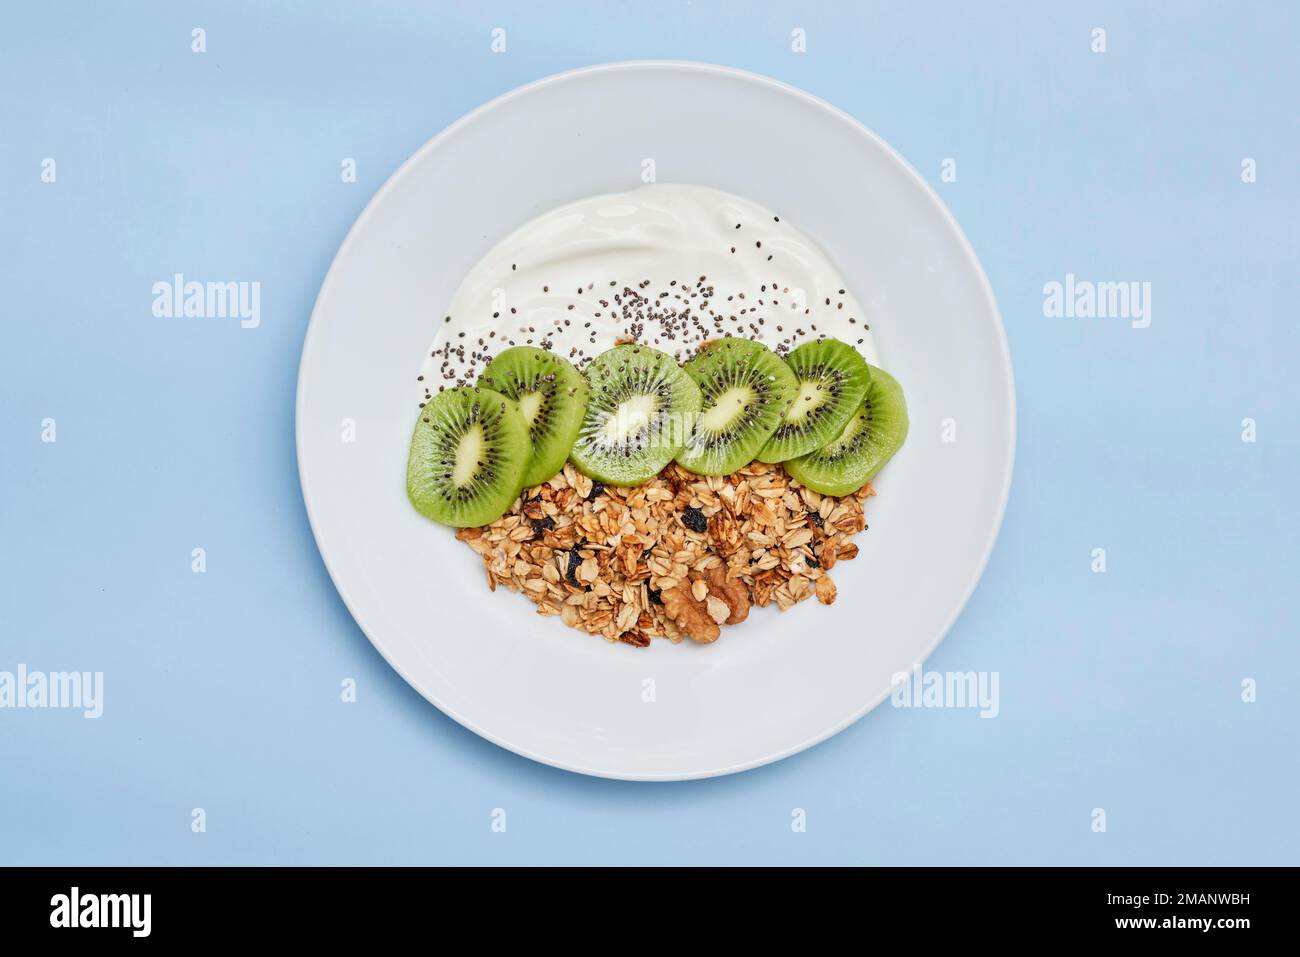 some fruit and nuts on a white plate with yorame in the middle, topped with grano de galloas Stock Photo